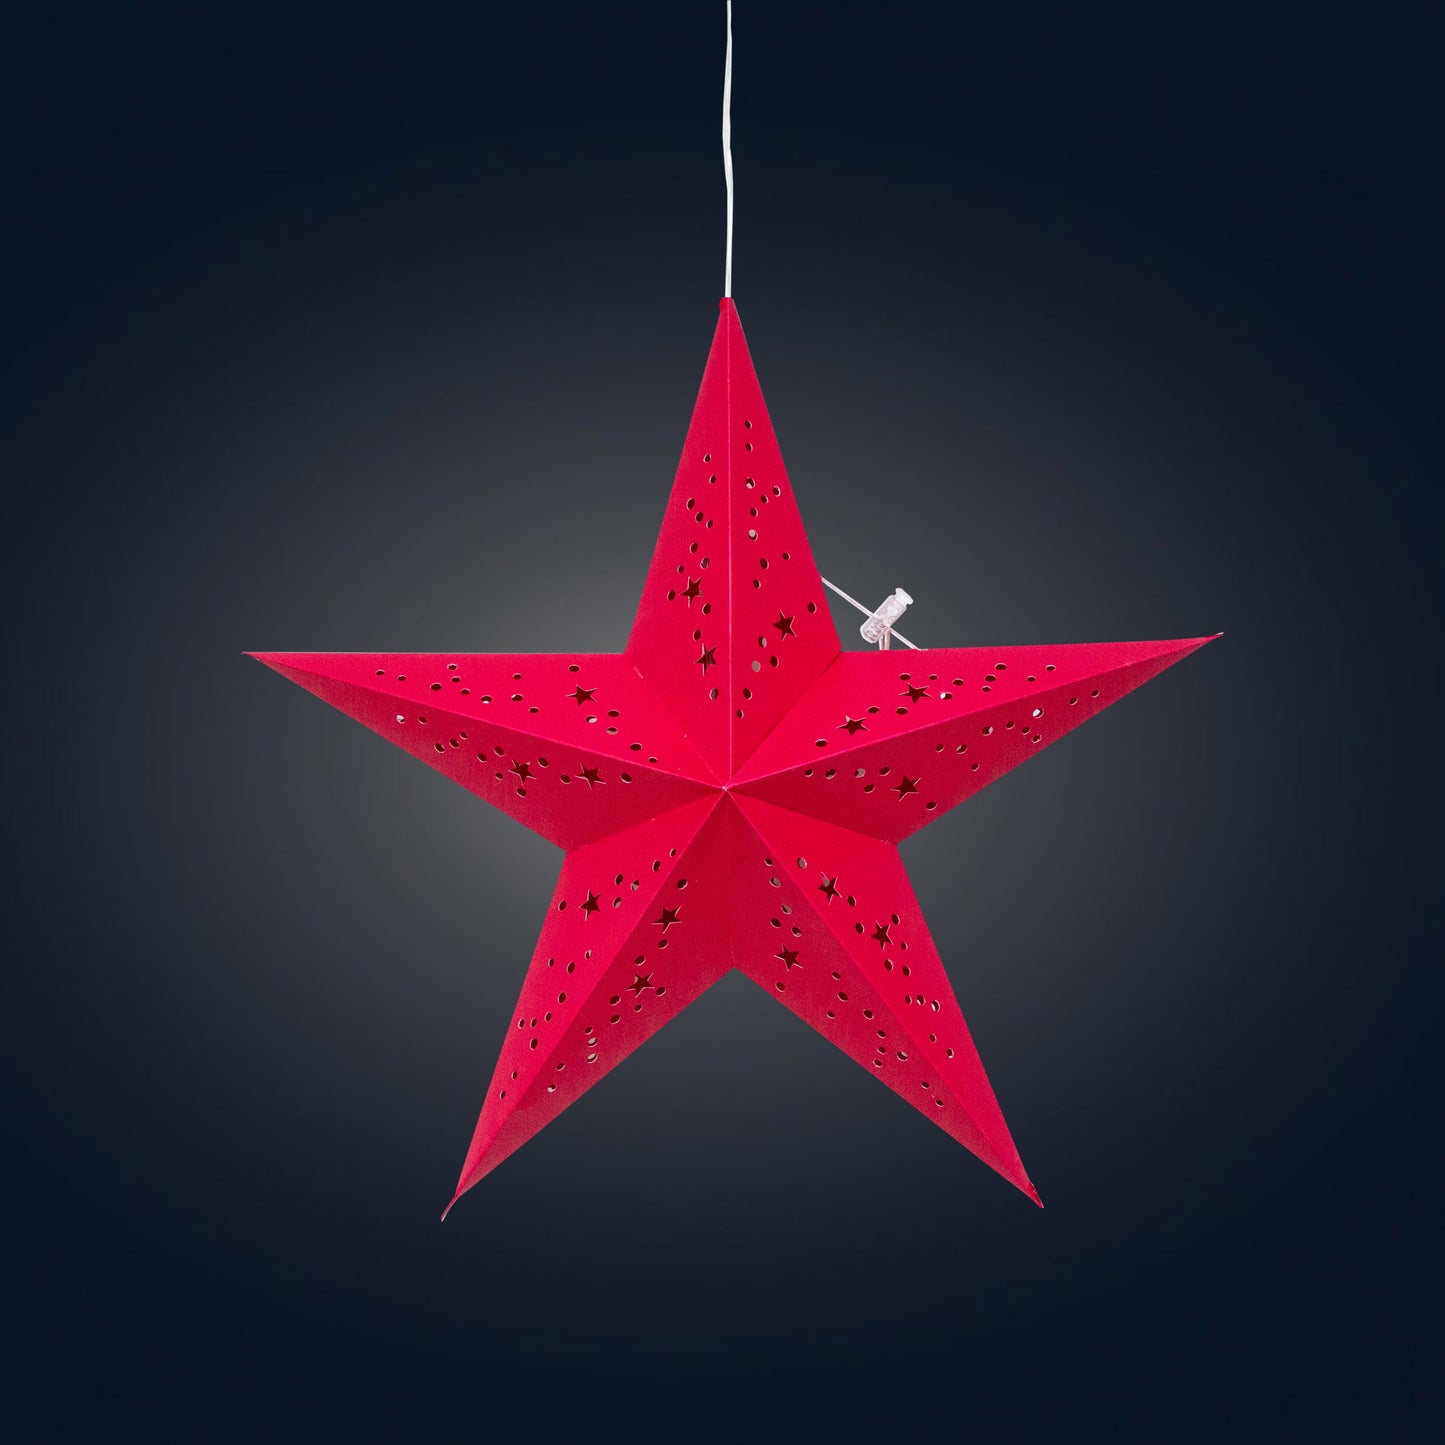 Twinkle Star 5 Point 15" Red